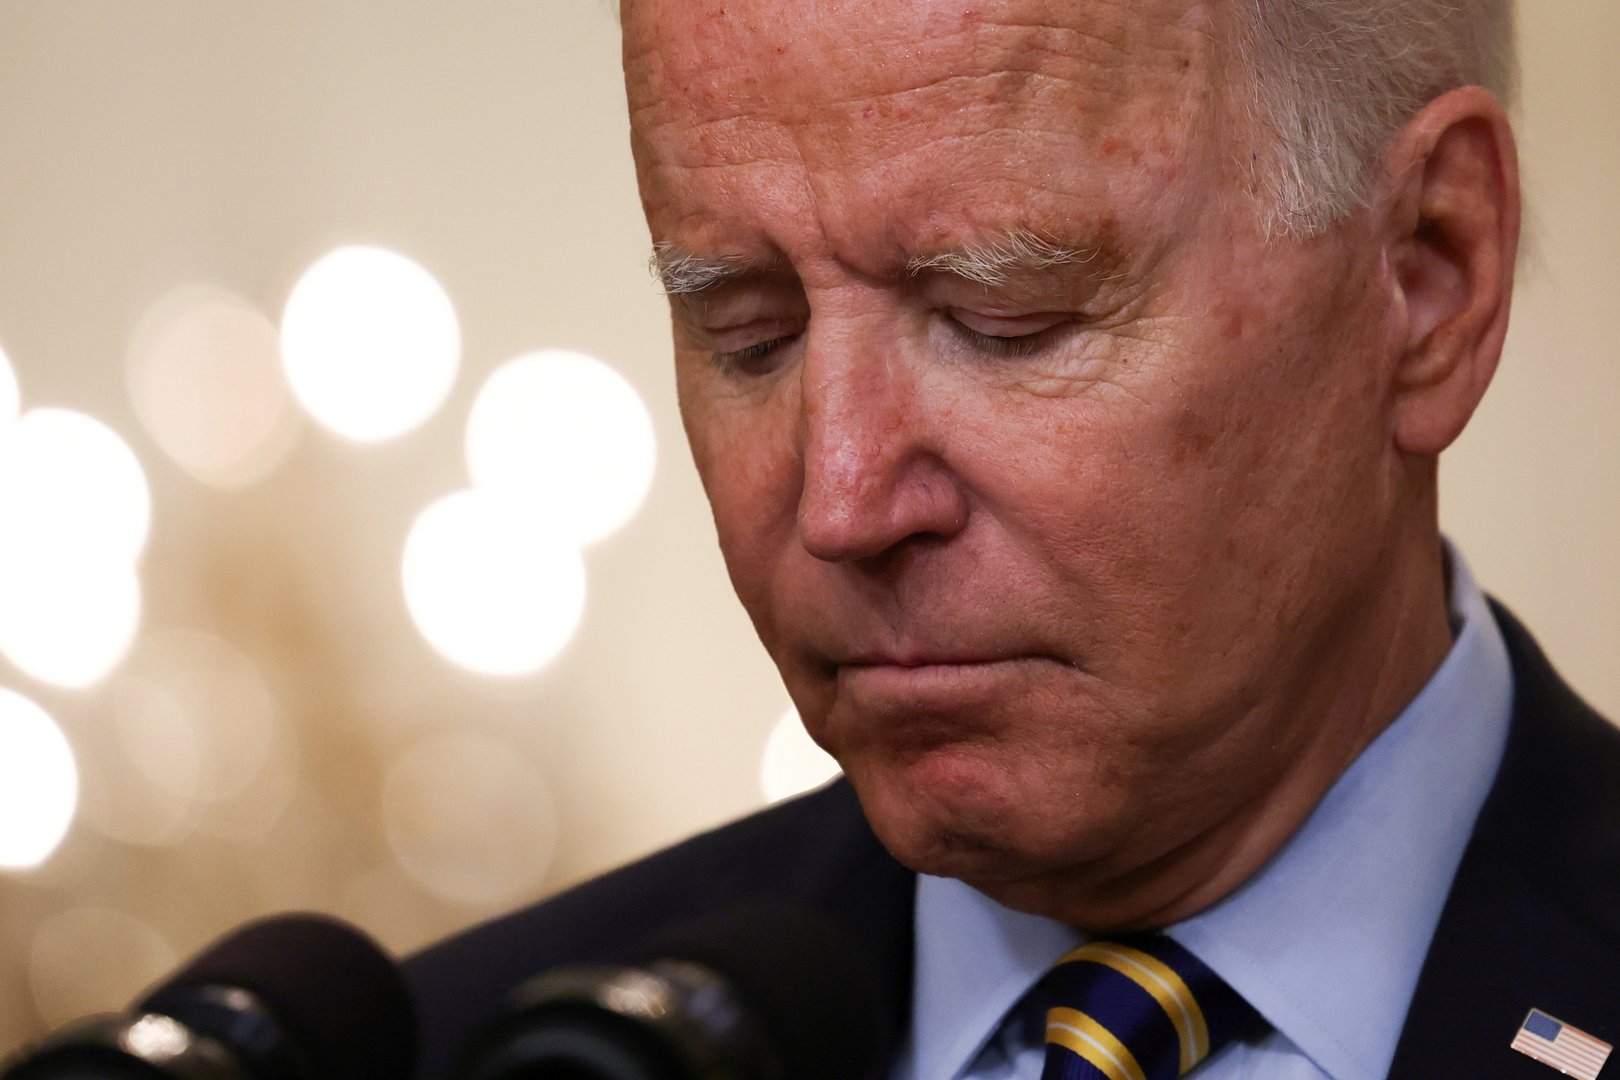 image Biden lost faith in the US mission in Afghanistan over a decade ago